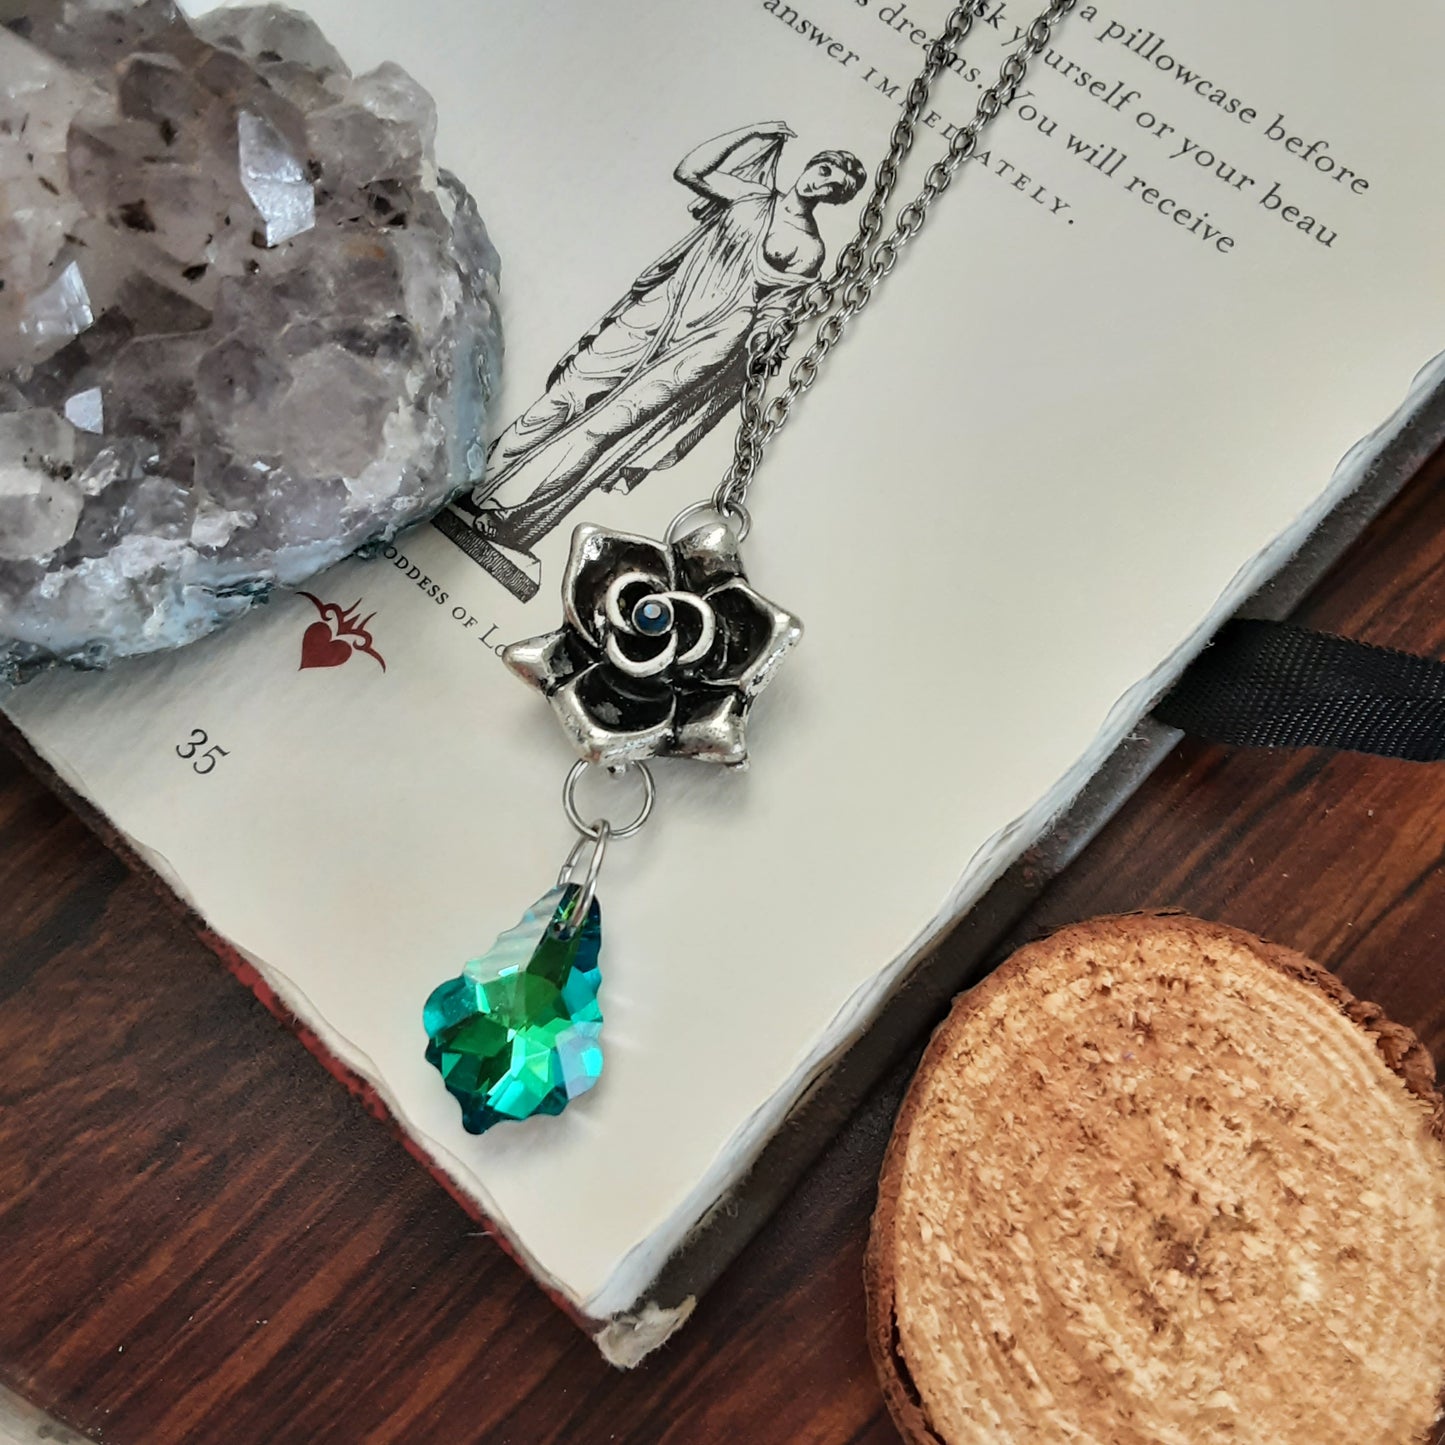 Rose and crystal necklace